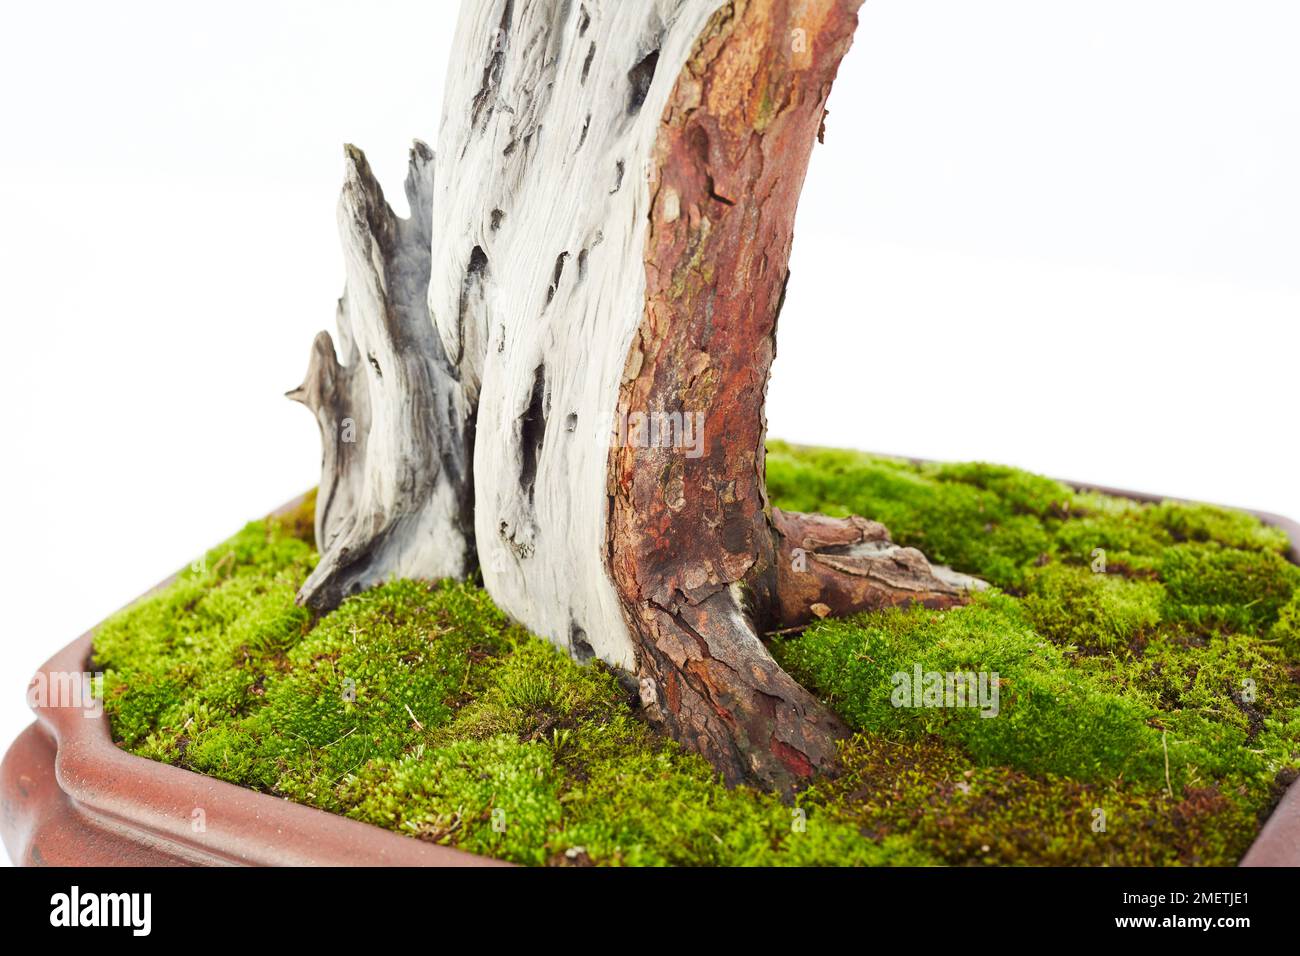 European Yew (Taxus Baccata), whitened dead wood adds texture Stock Photo